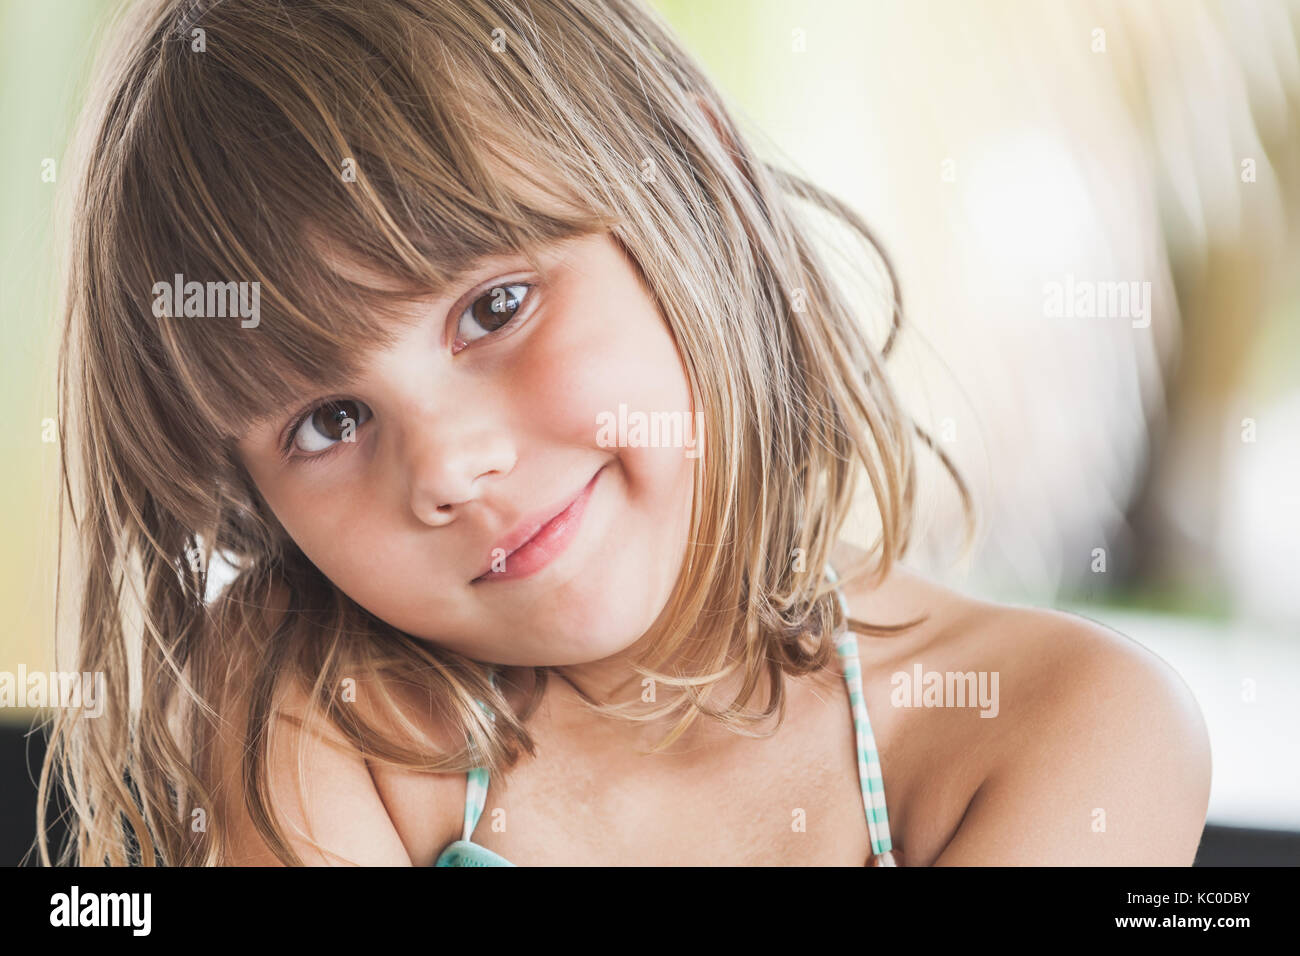 Slightly smiling Caucasian little girl, close-up outdoor face portrait Stock Photo